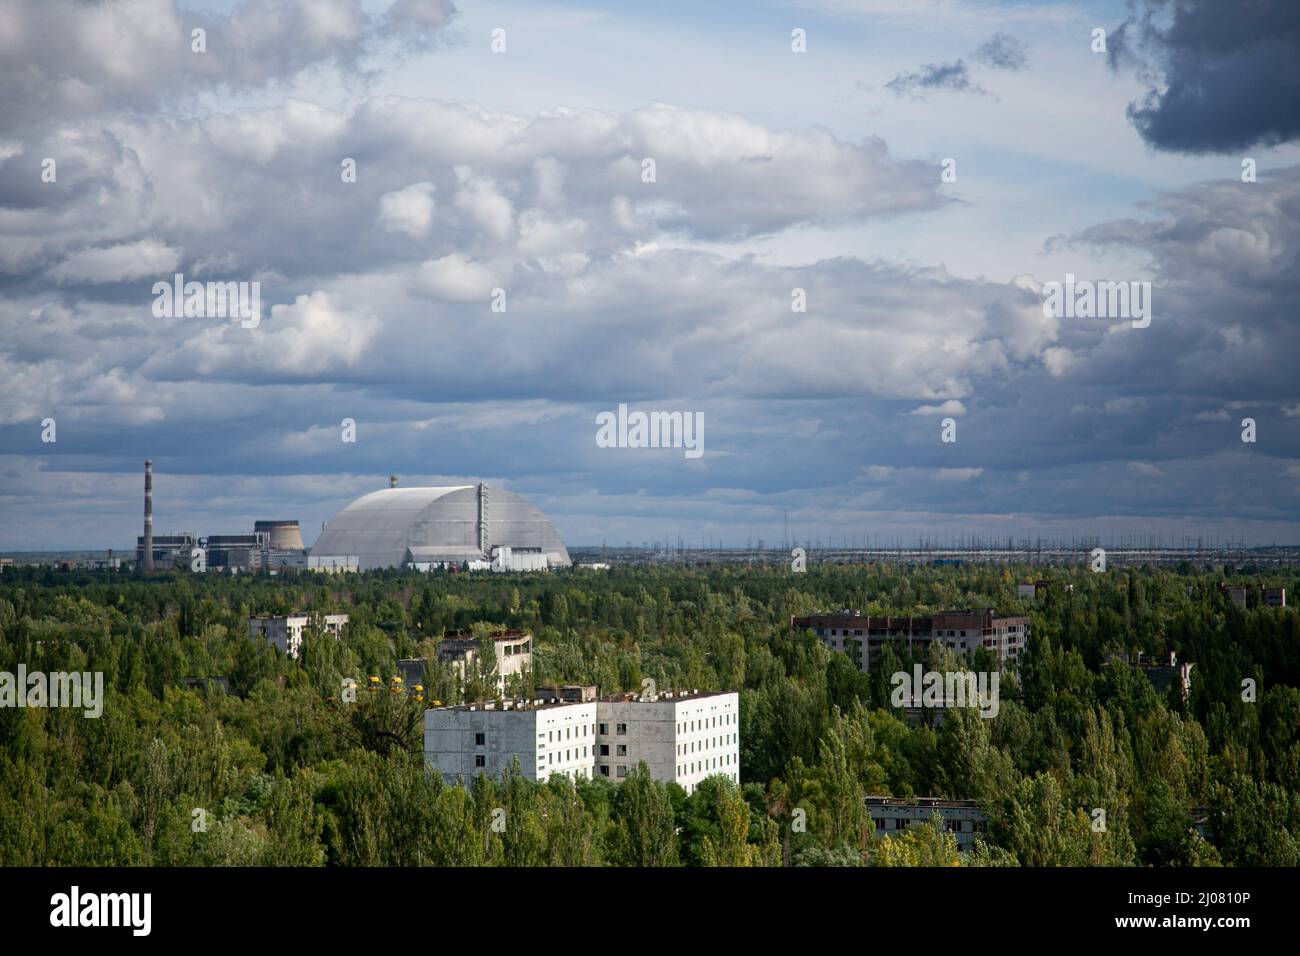 Pripyat, Ukraine. 4th Sep, 2019. A distance view of the arch-shaped New Safe Confinement structure installed in 2016 to contain the remains of Chernobyl's number 4 reactor unit which was destroyed during the historical Chernobyl nuclear disaster in 1986 due to the meltdown and explosion of the nuclear reactor. The situation of the Chernobyl nuclear plant remains at high risk according to the Ukrainian government since the Russian Force captured the area. The Russian Force repeatedly halt the energy supply to the nuclear plant which was used to cool down the core of the destroyed number 4 n Stock Photo